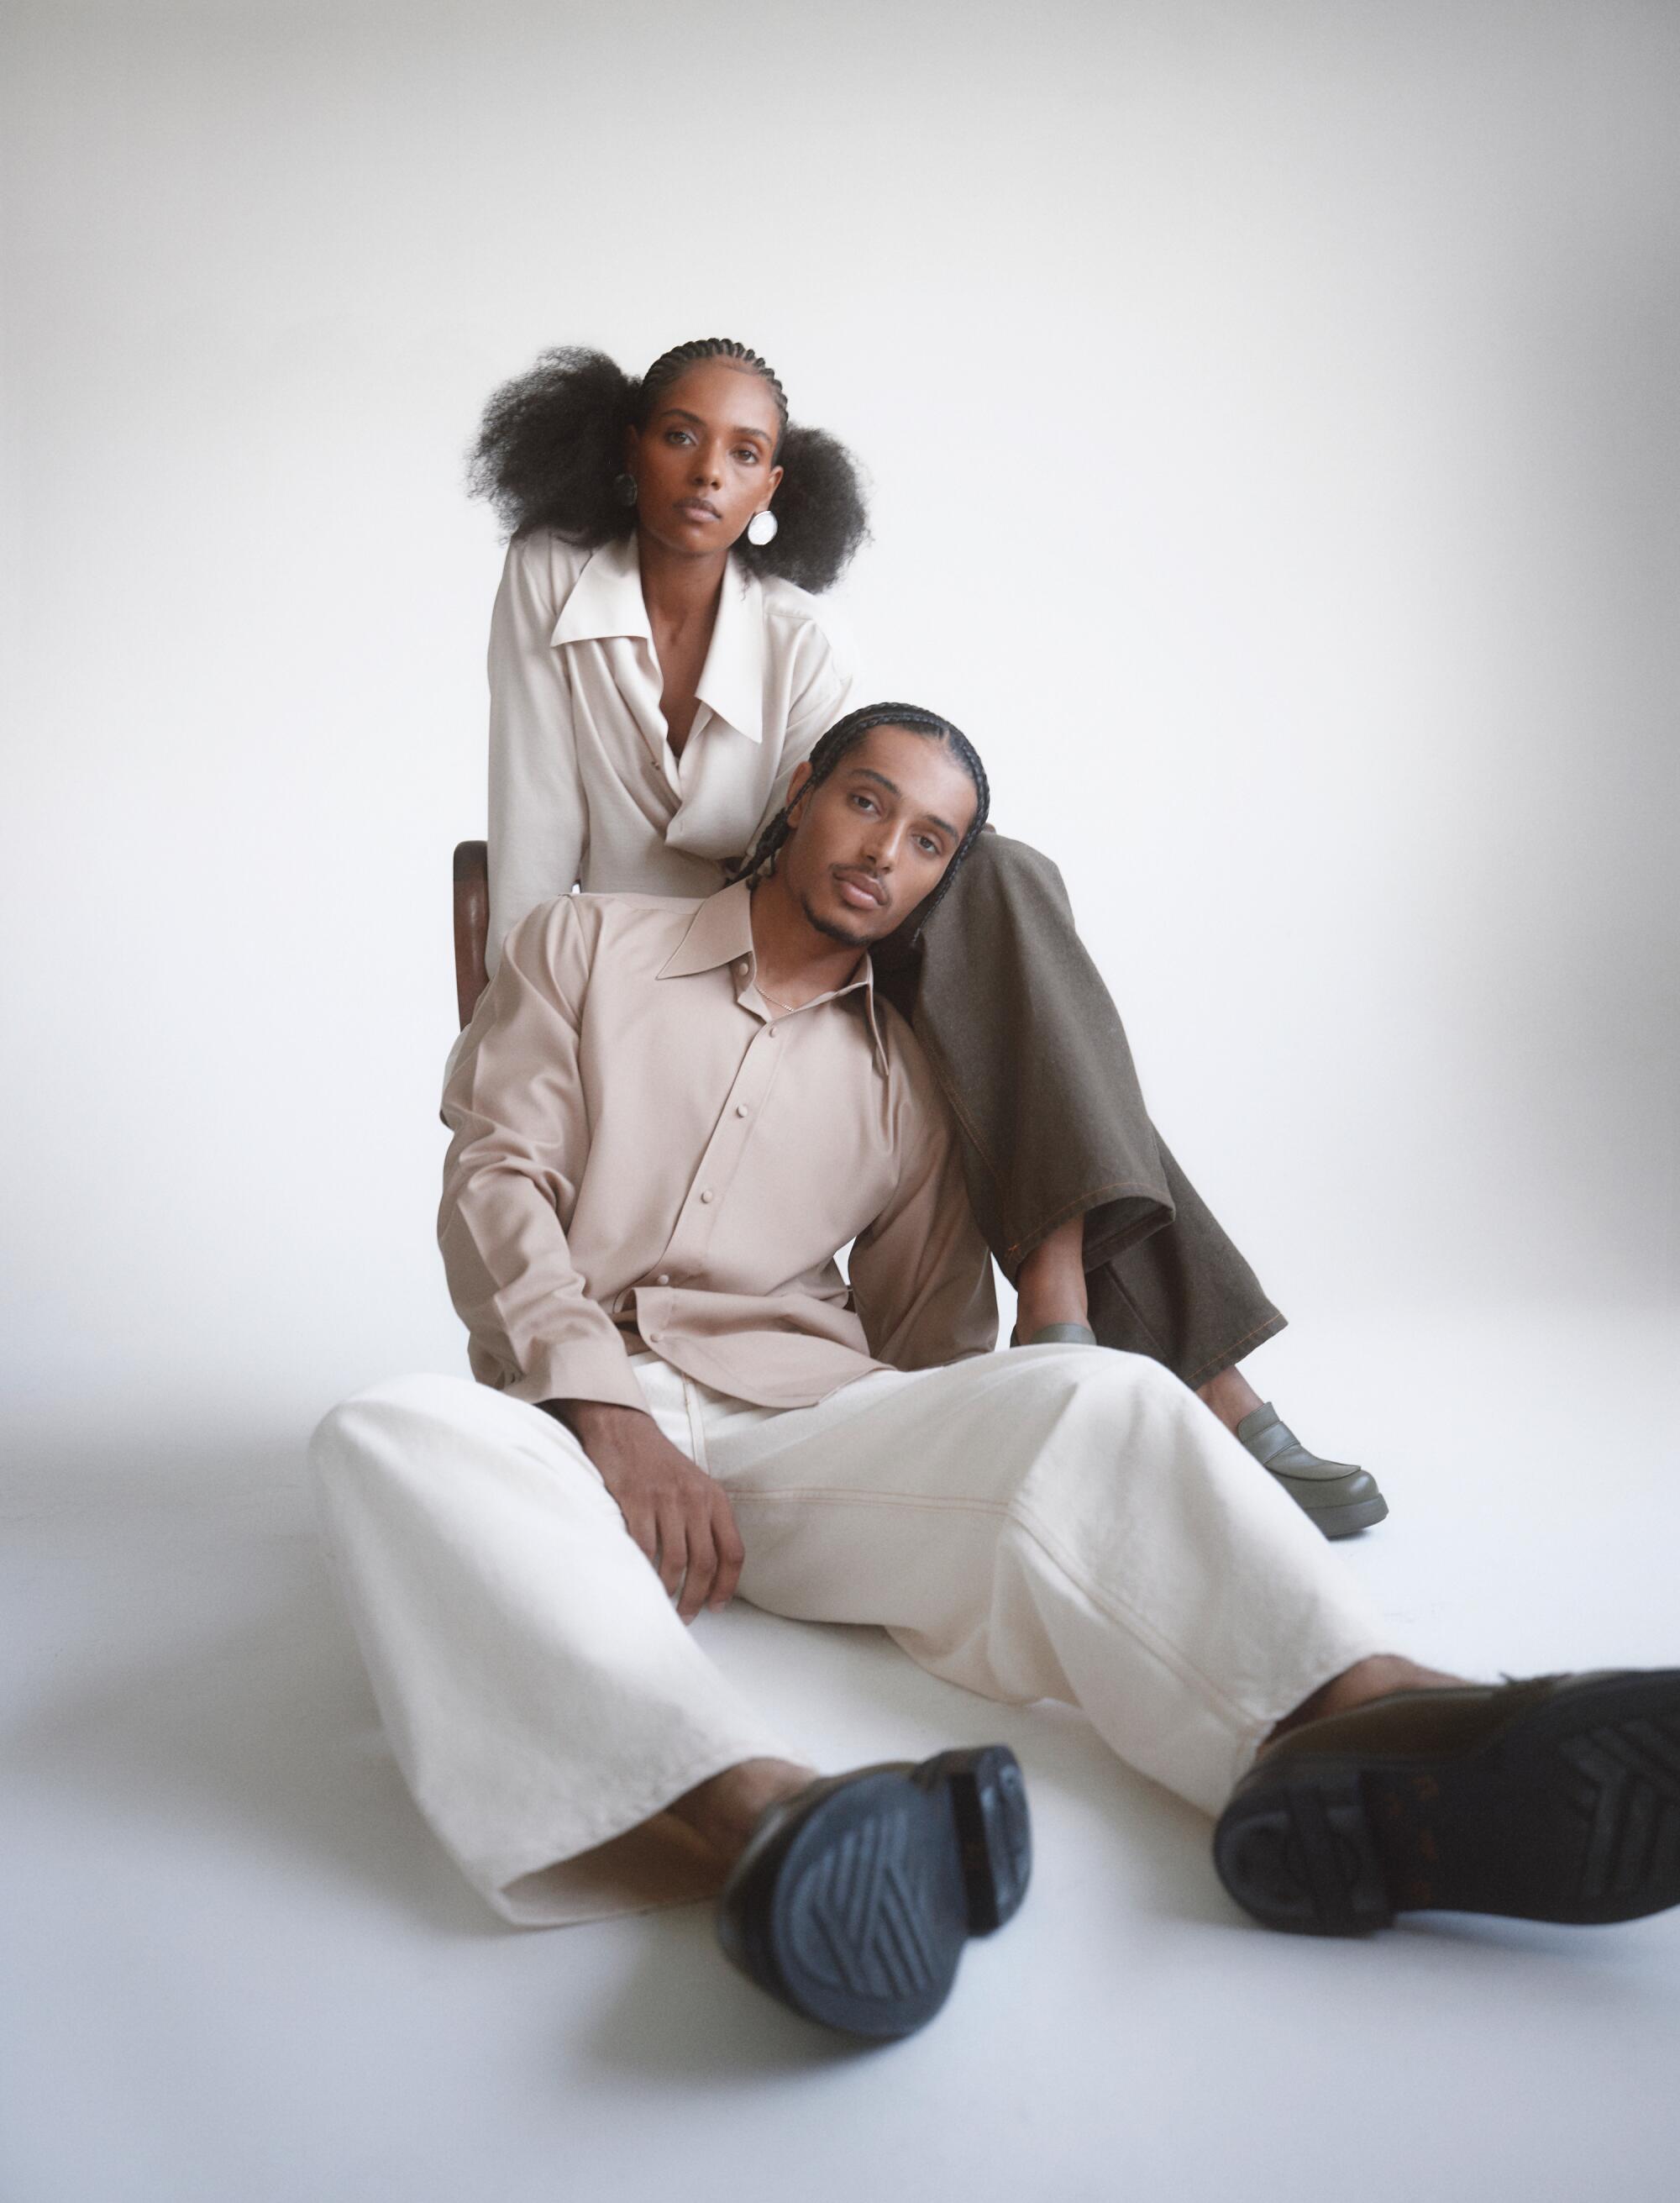 A male model sits on the floor, leaning his head on the leg of a female model. Both wear cream-colored outfits.